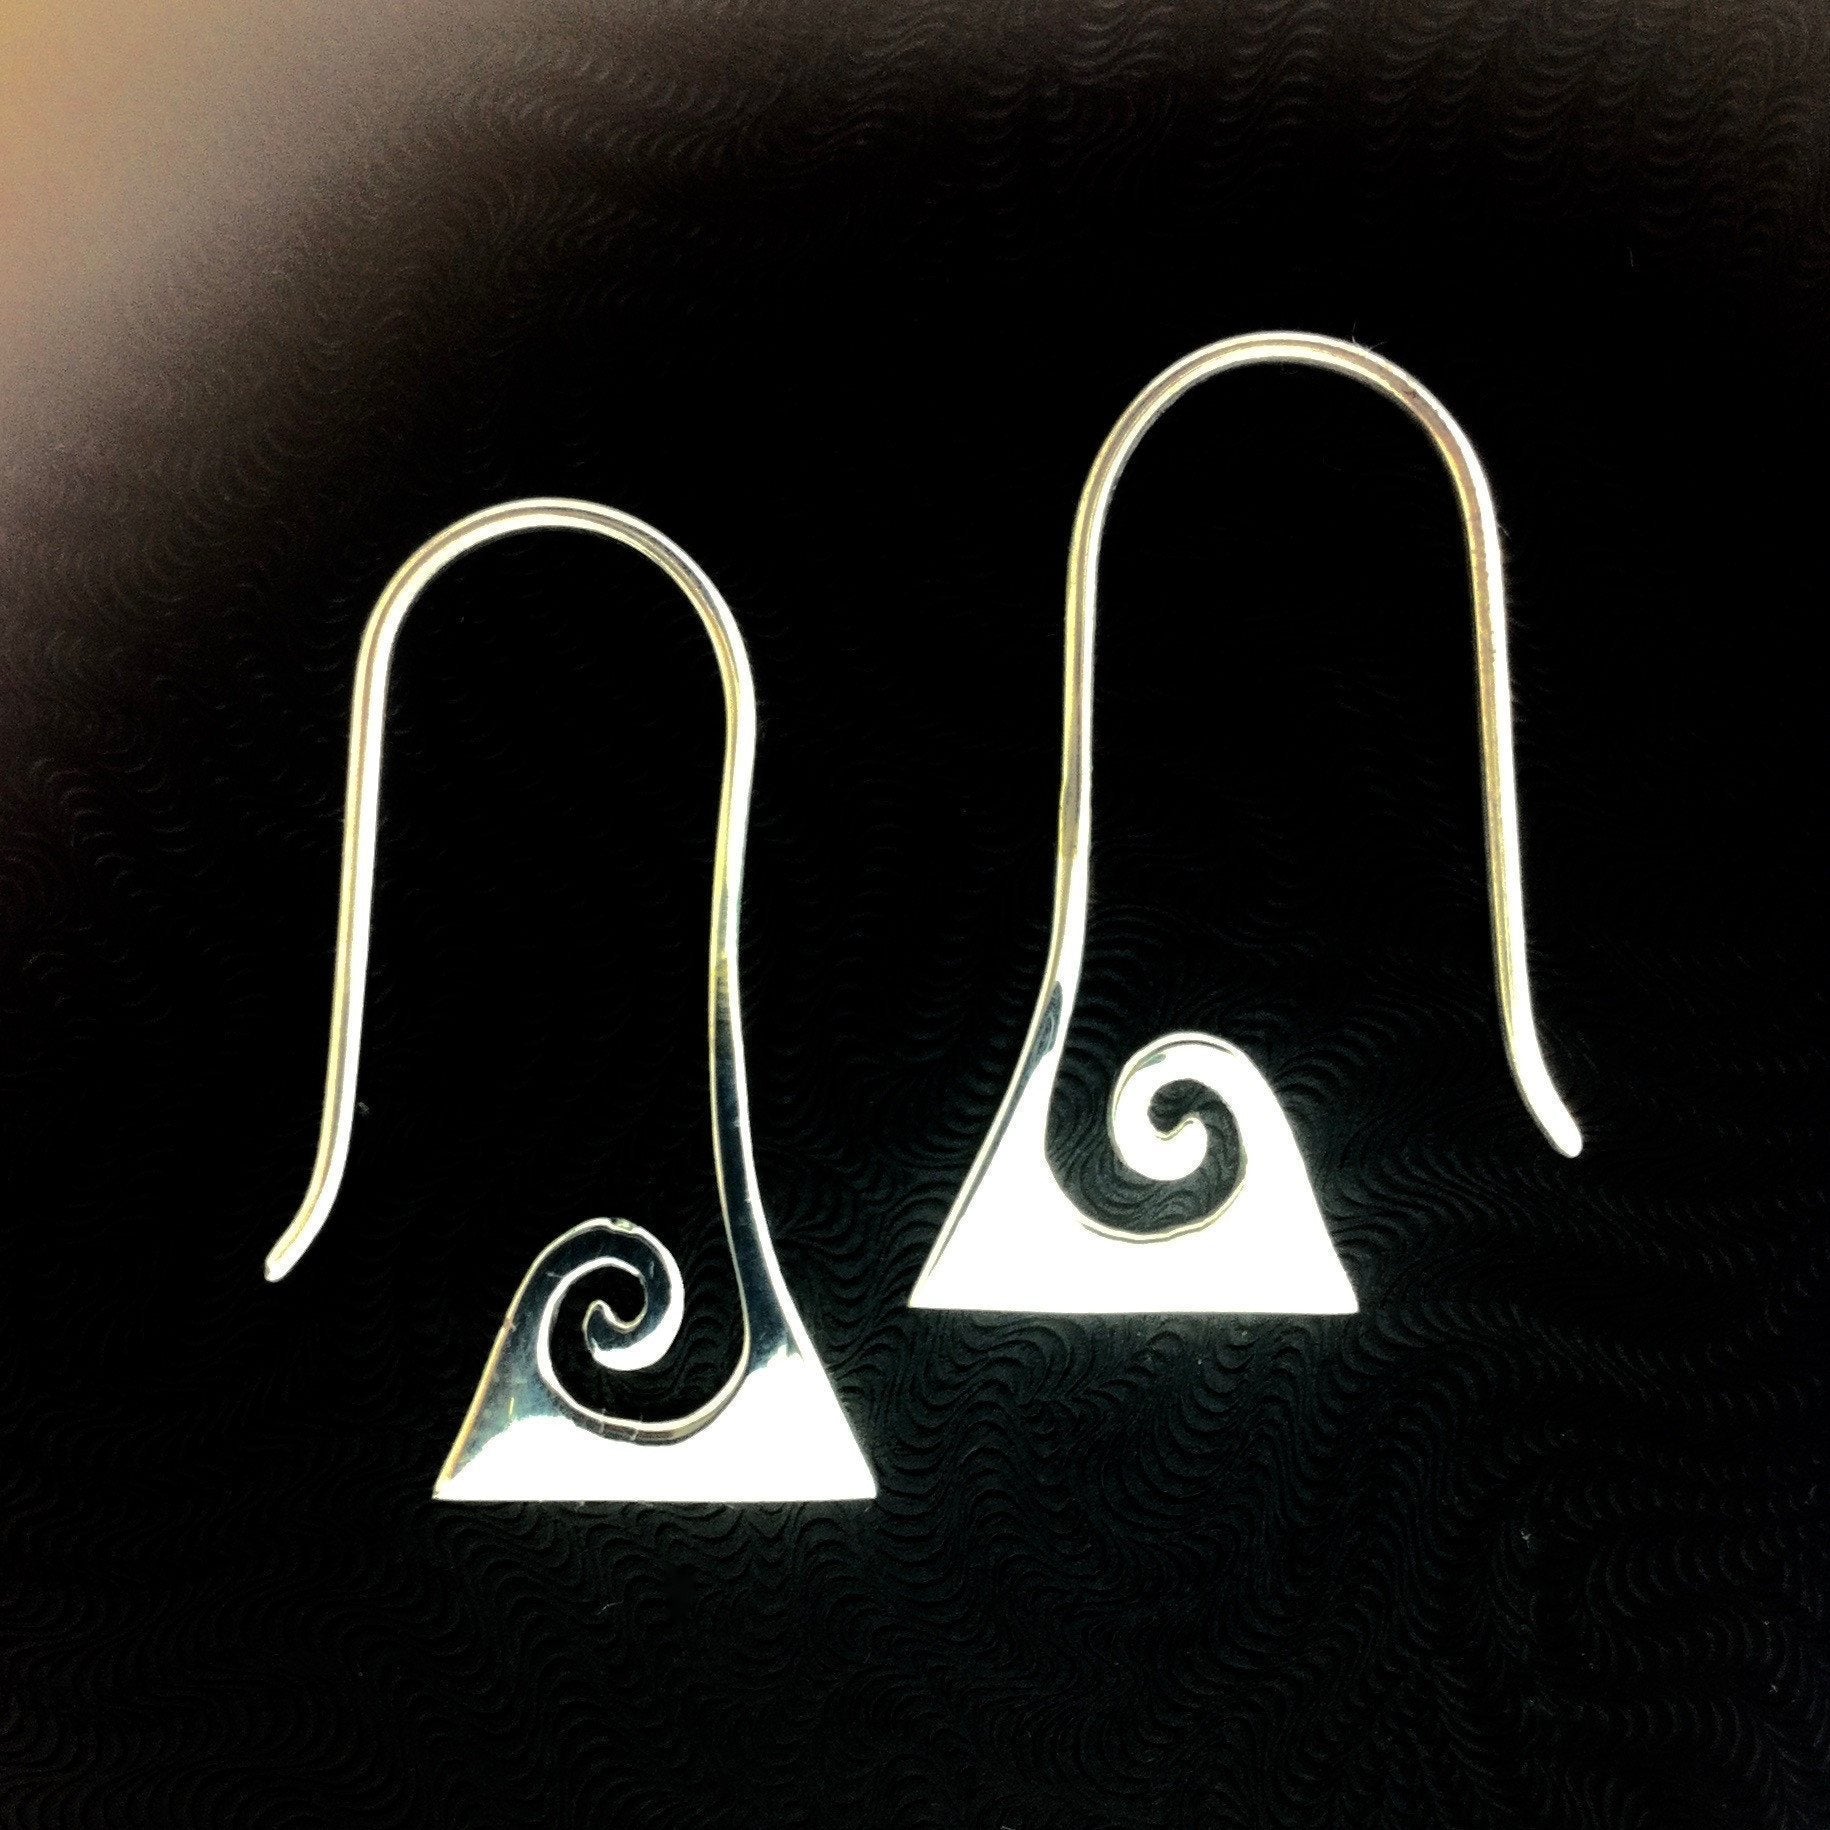 Tribal Earrings :|: Triangle Curve. sterling silver, 925 tribal earrings. | Tribal Silver Earrings